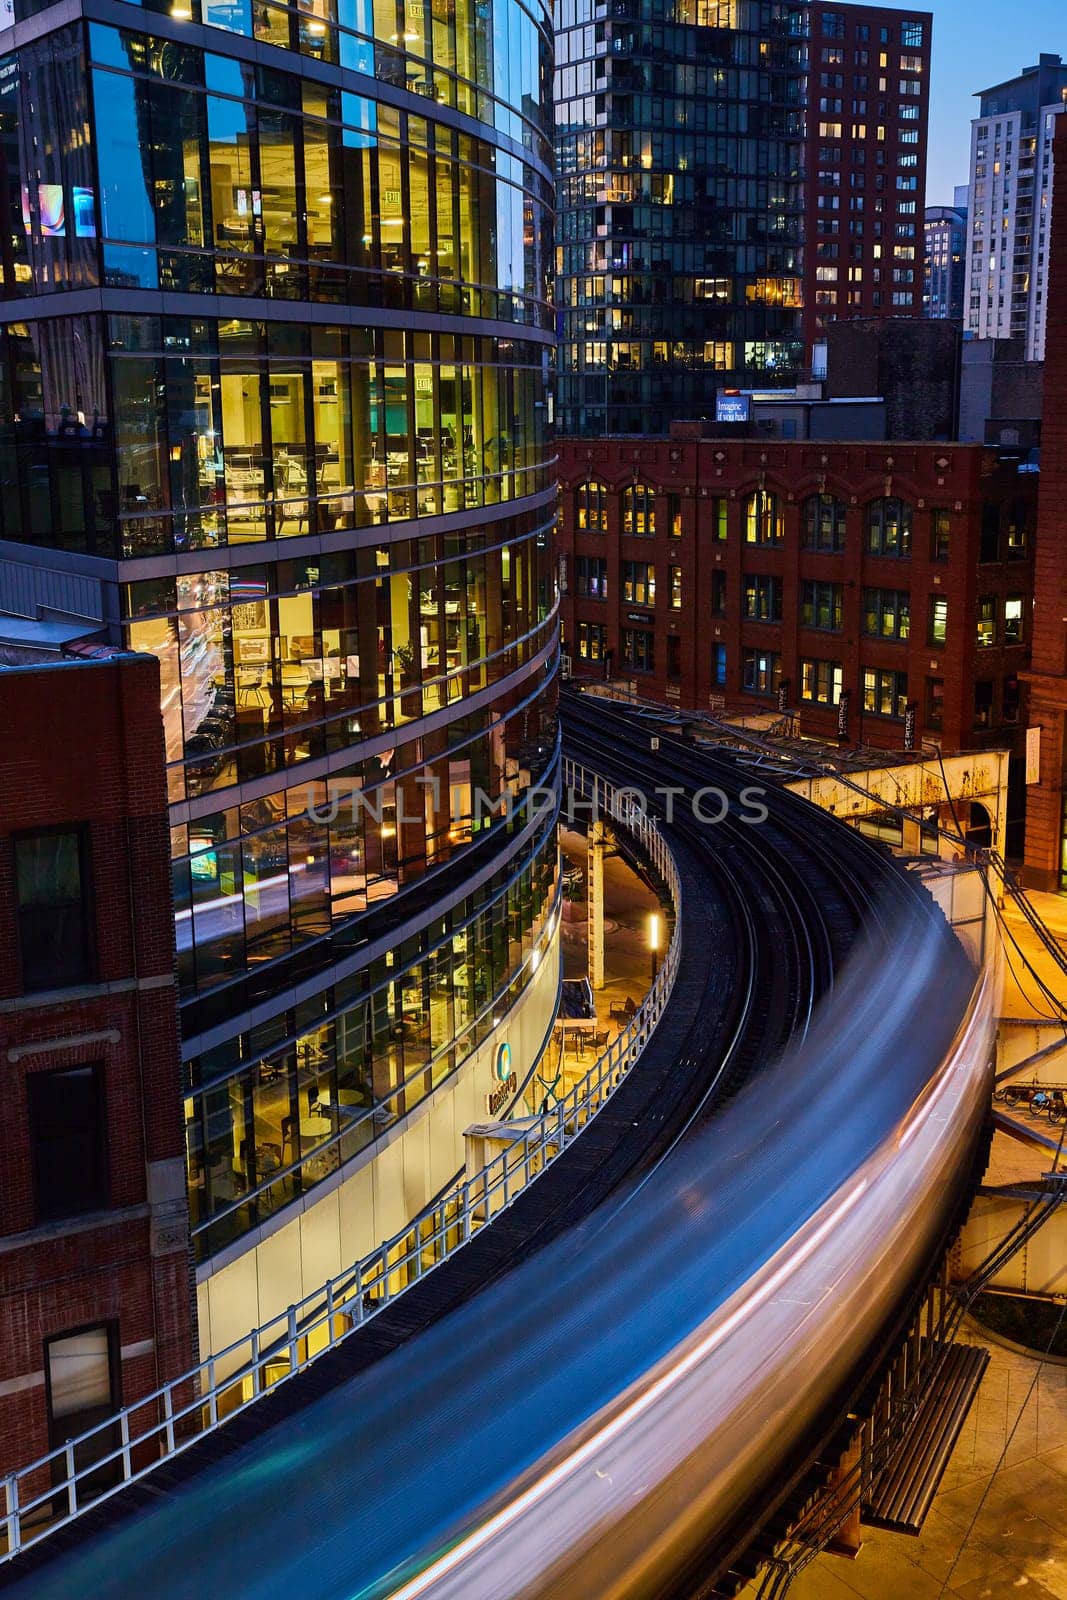 Chicago Urban Dynamic: Train in Motion, Glass and Brick Buildings at Twilight by njproductions